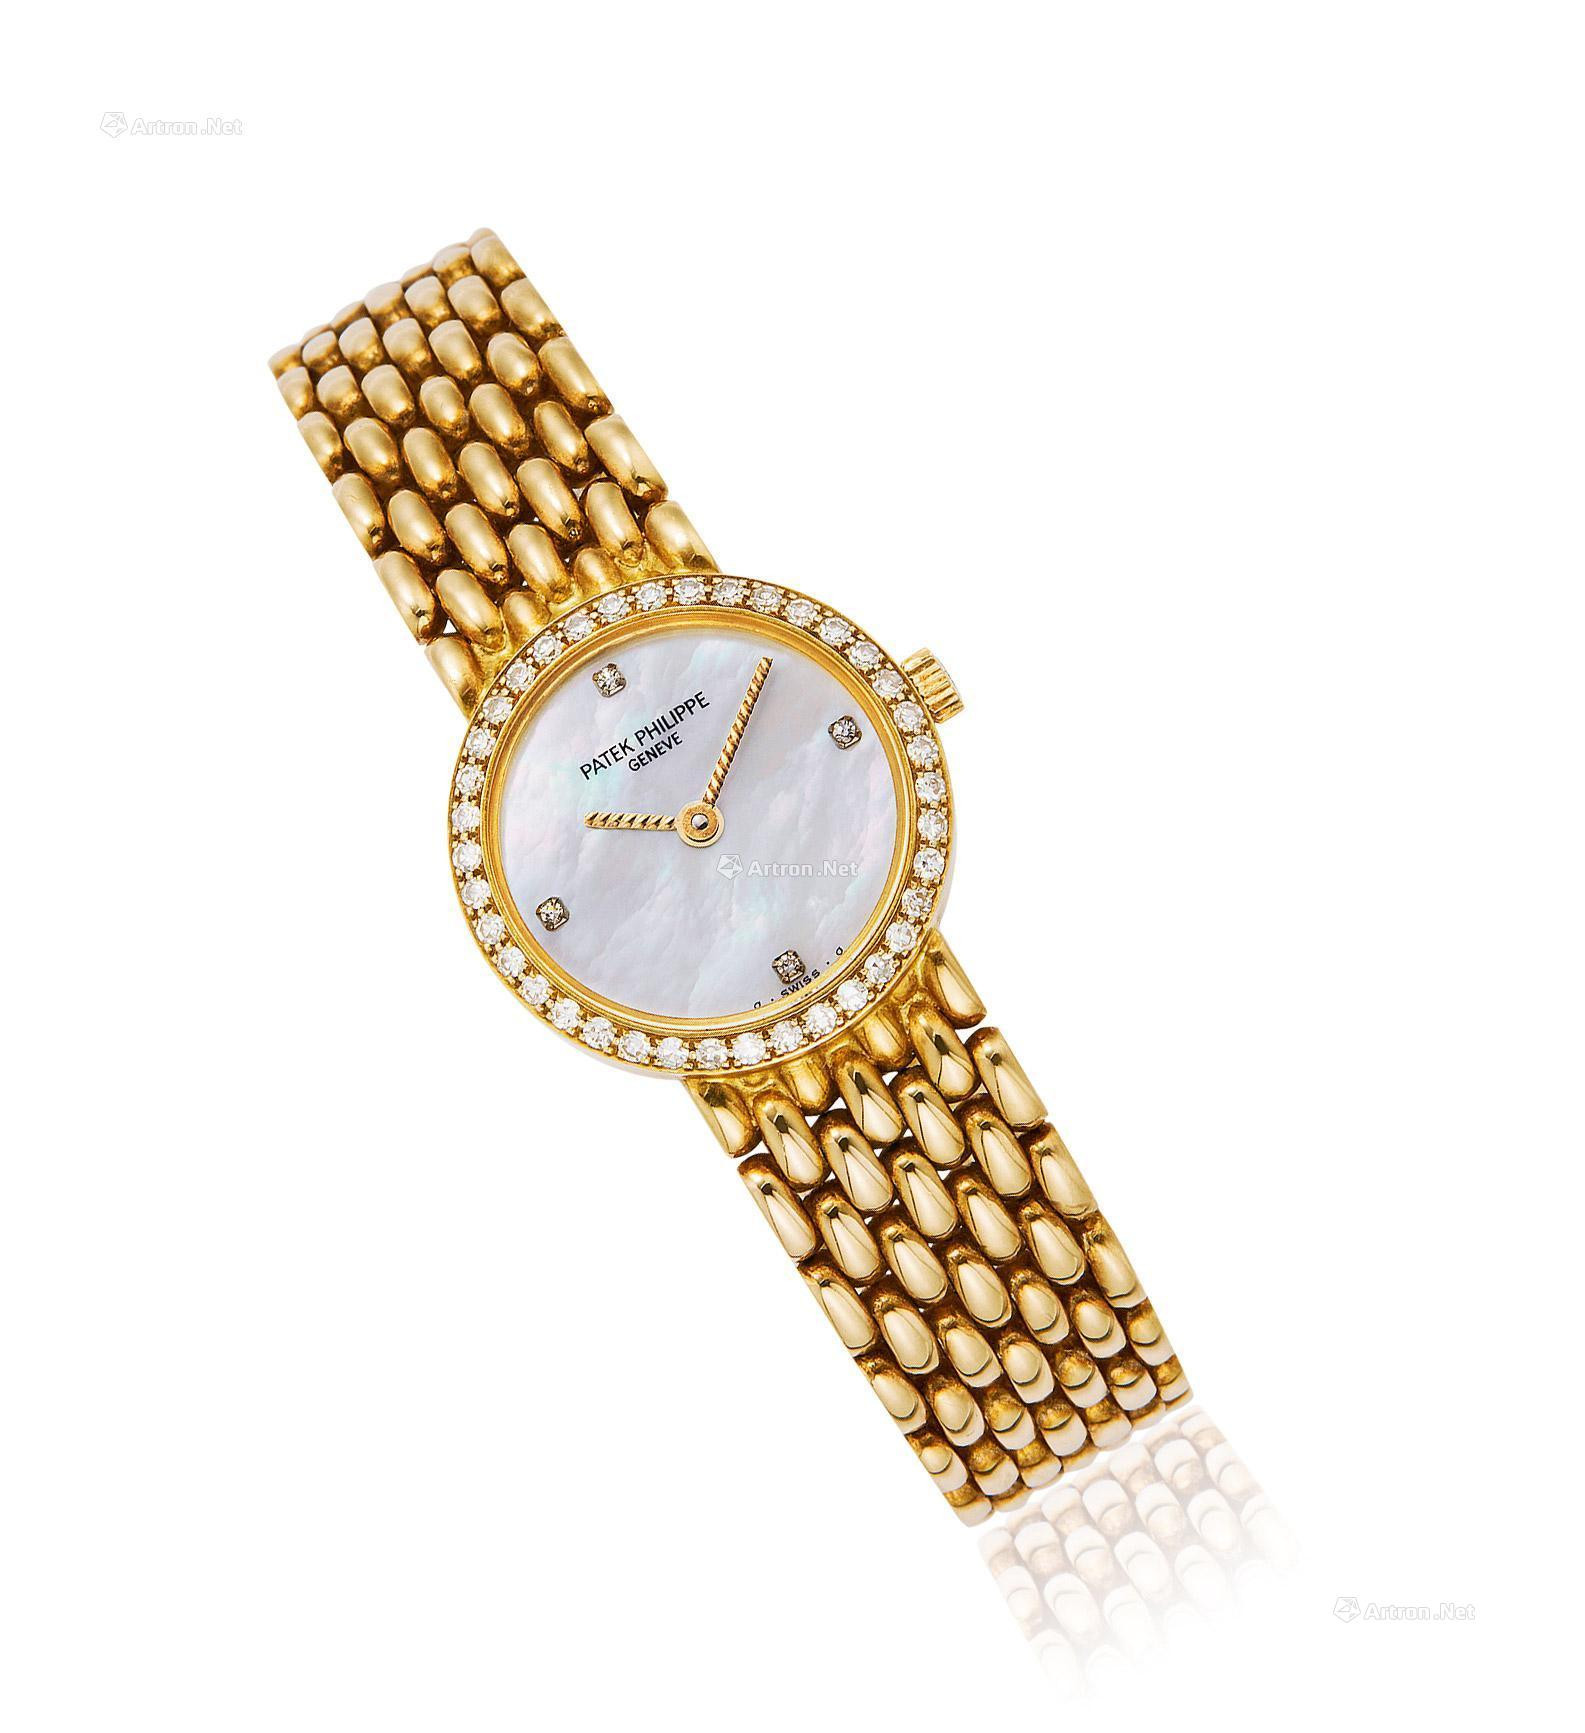 PATEK PHILIPPE A LADY’S YELLOW GOLD WITH DIAMOND-SET WRISTWATCH WITH MOTHER-OF-PEARL DIAL